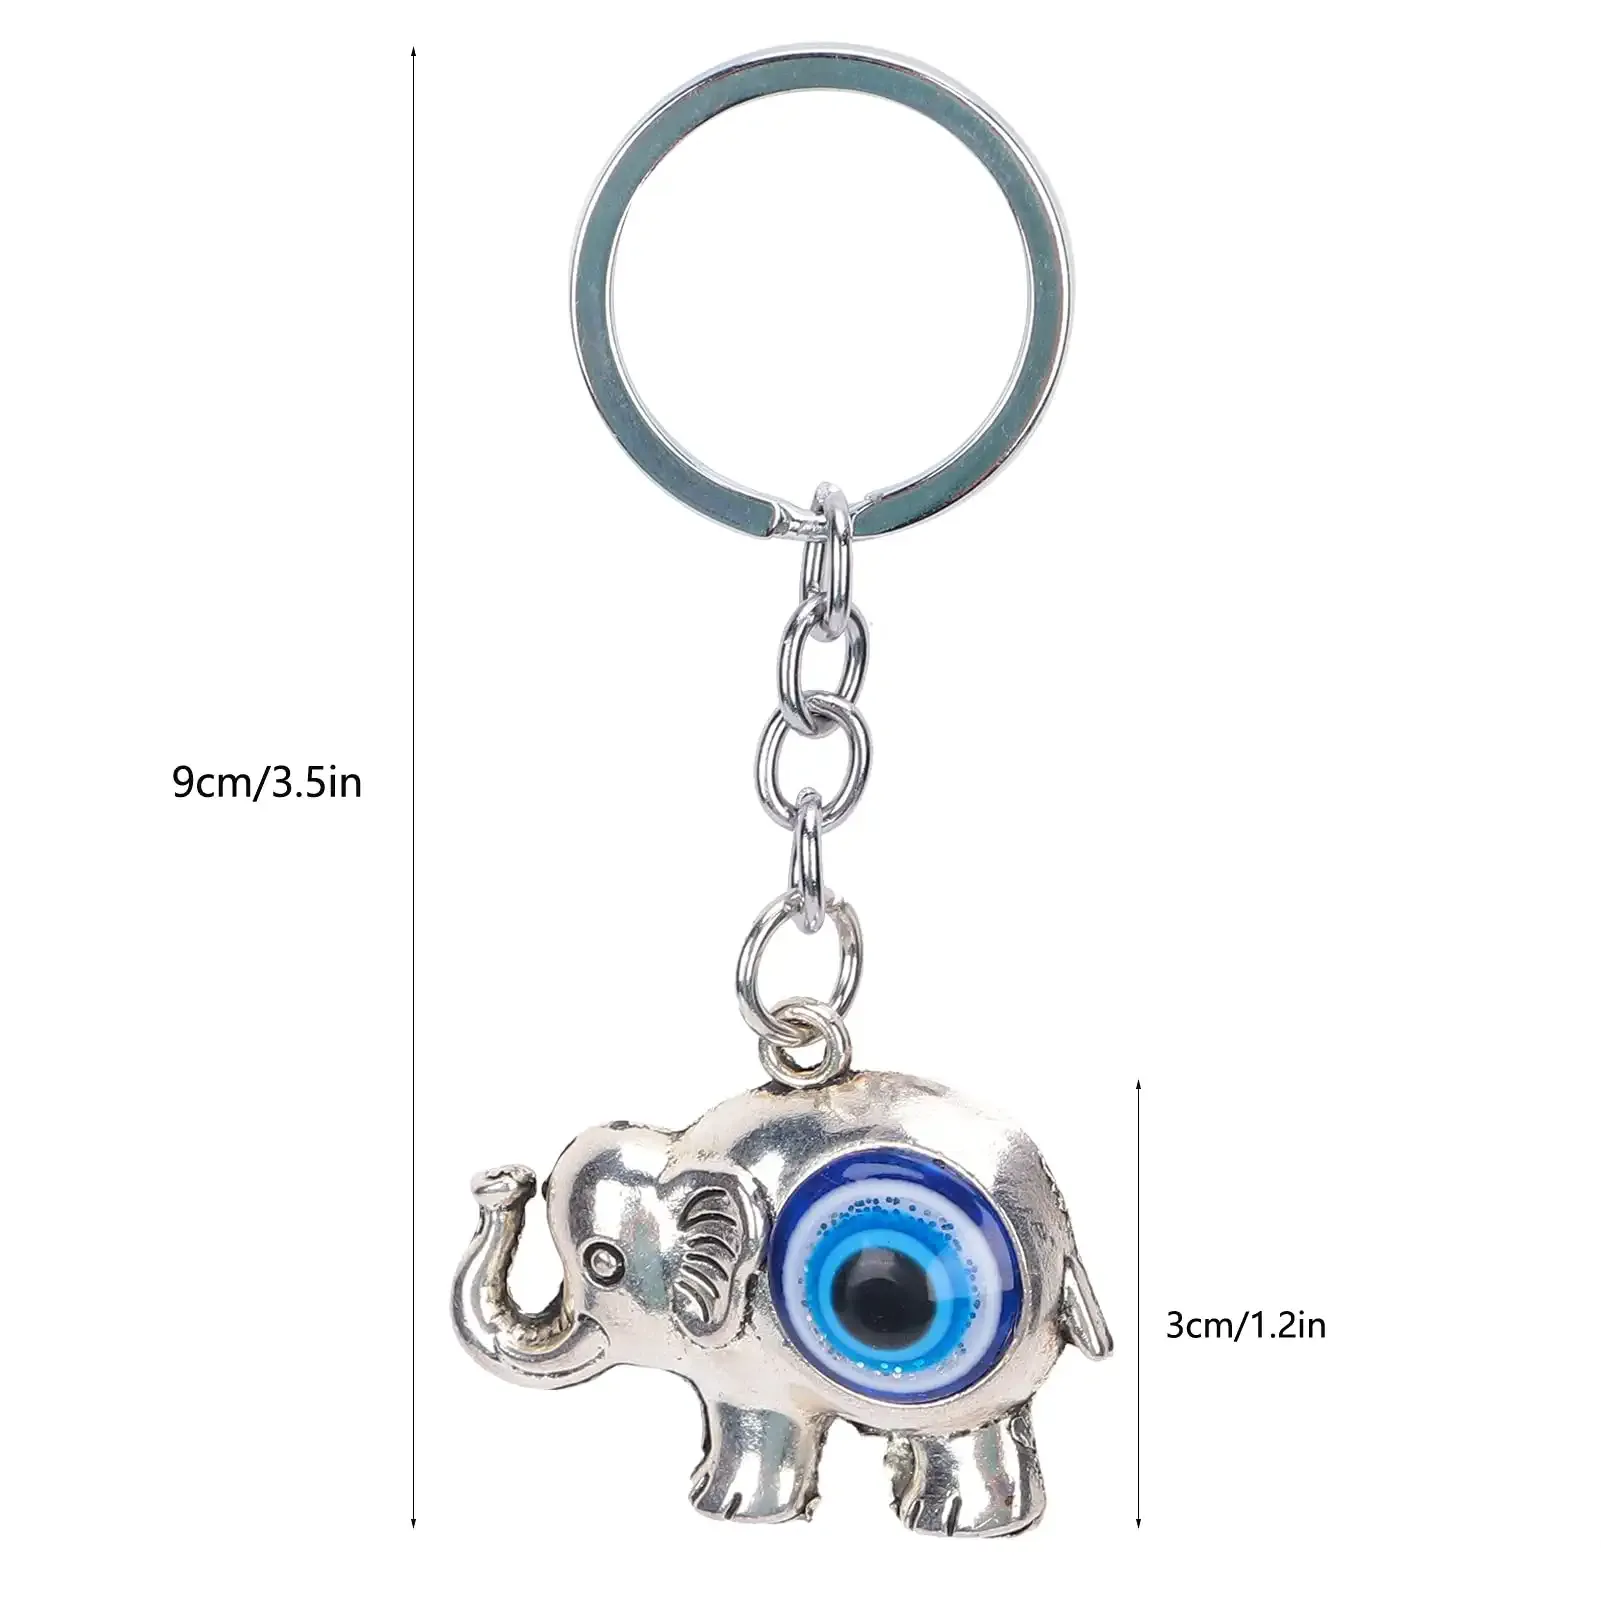 3ml blue evil eye keychain silver lucky elephant key ring good luck key pendant elephant charm sign of protection and blessing hanging ornament for car/backpack/handbag/purse